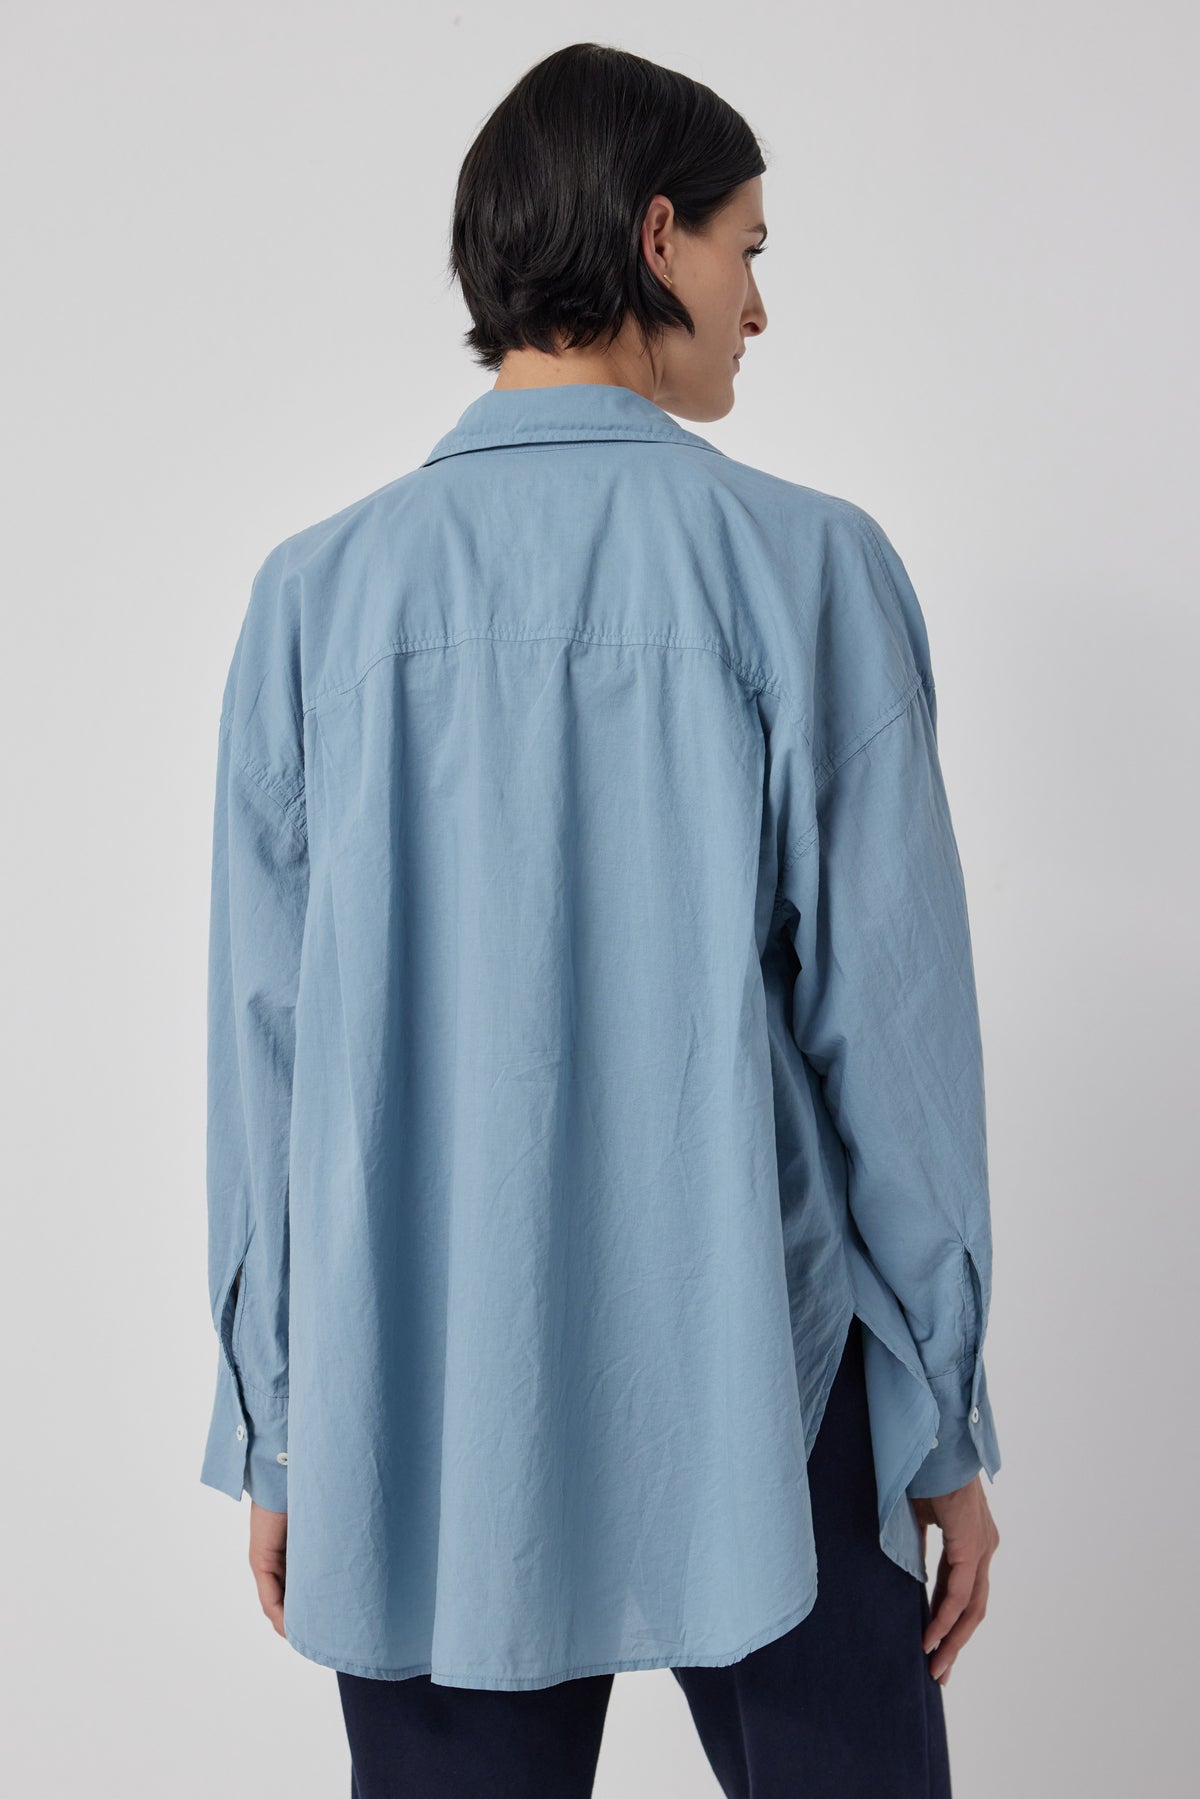 The back view of a woman wearing an oversized blue cotton Velvet by Jenny Graham REDONDO BUTTON-UP SHIRT.-36168811053249